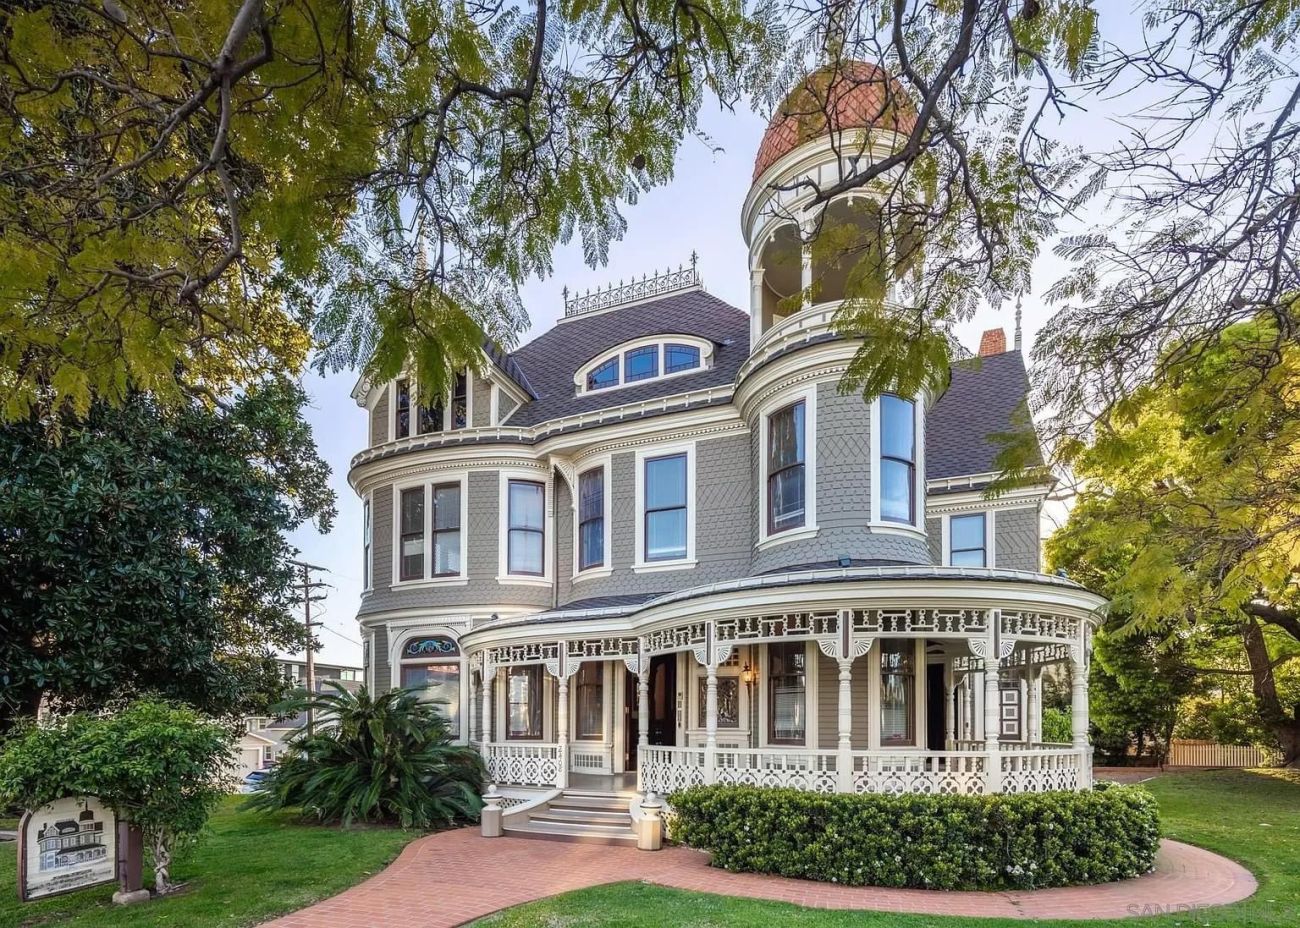 1889 Victorian For Sale In San Diego California